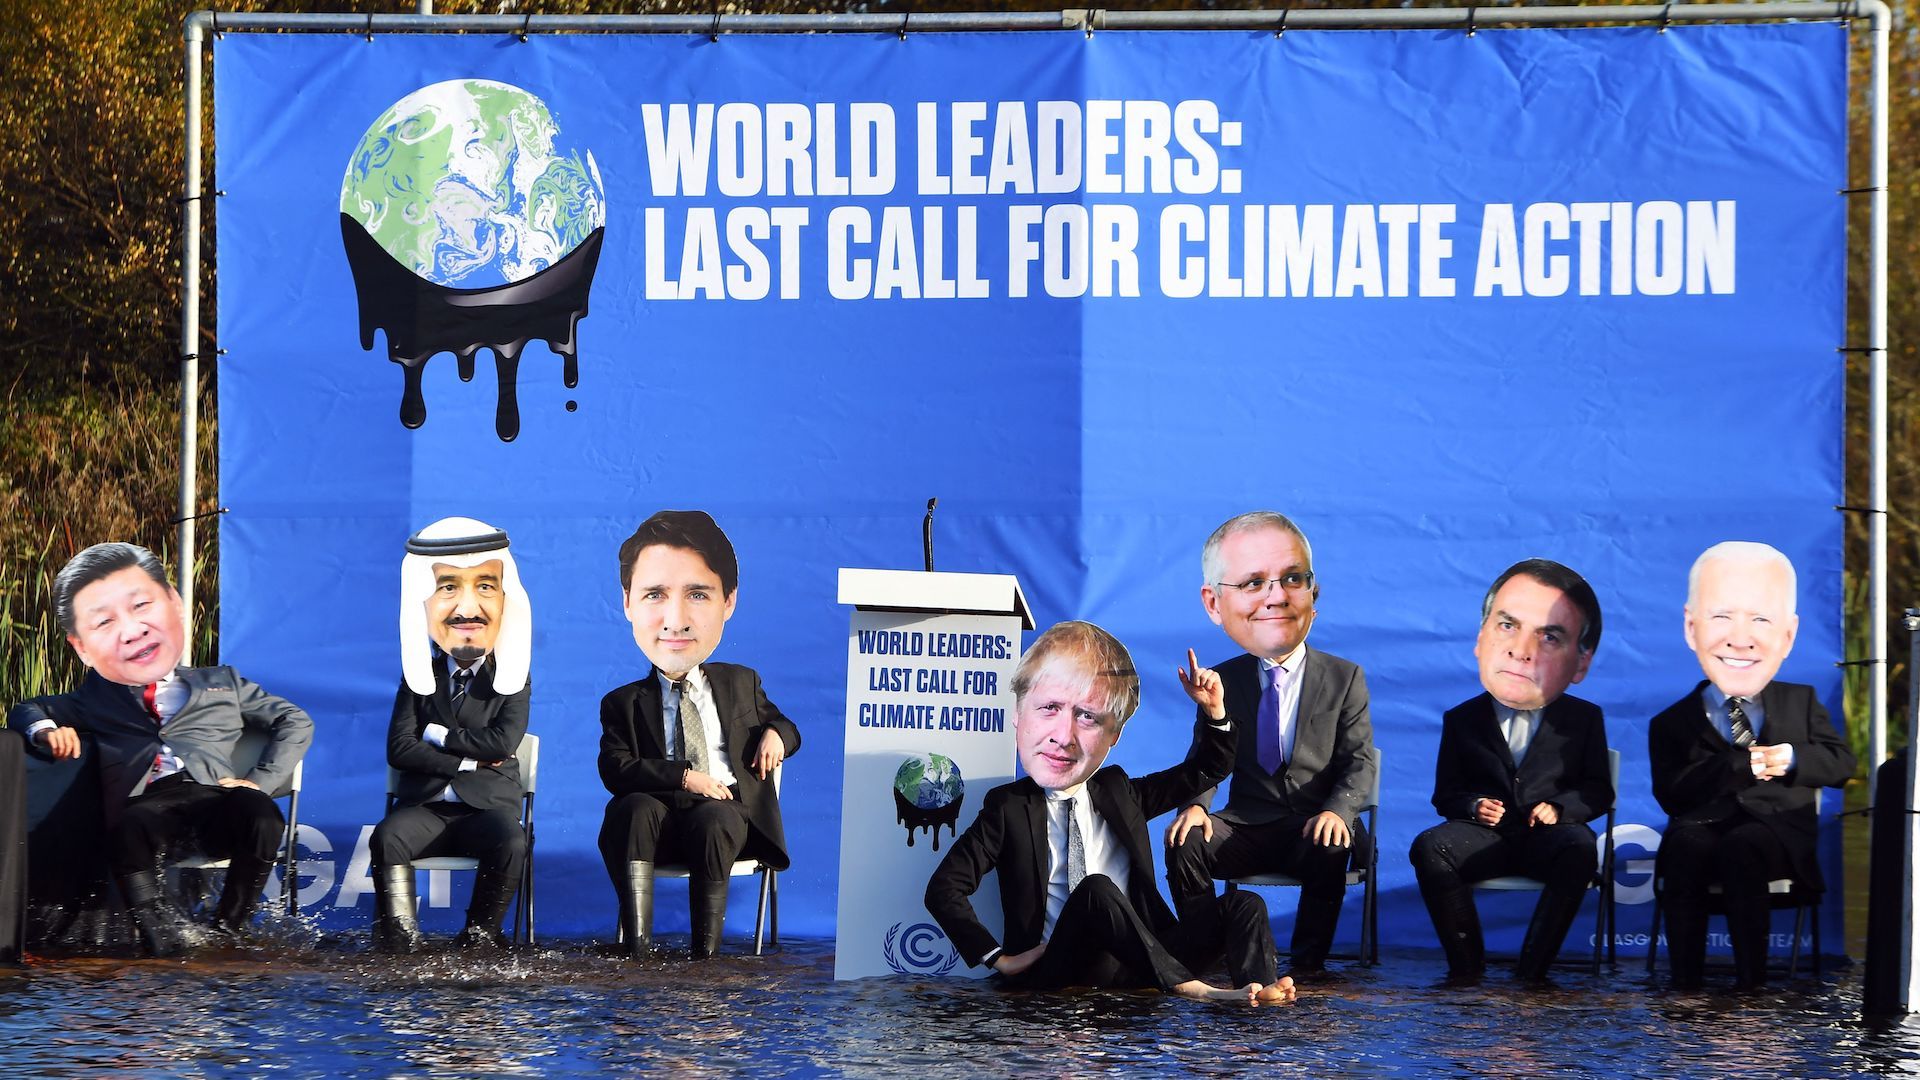 Protest at COP26 showing world leaders sinking into a river with "Last Call for Climate Action" sign.